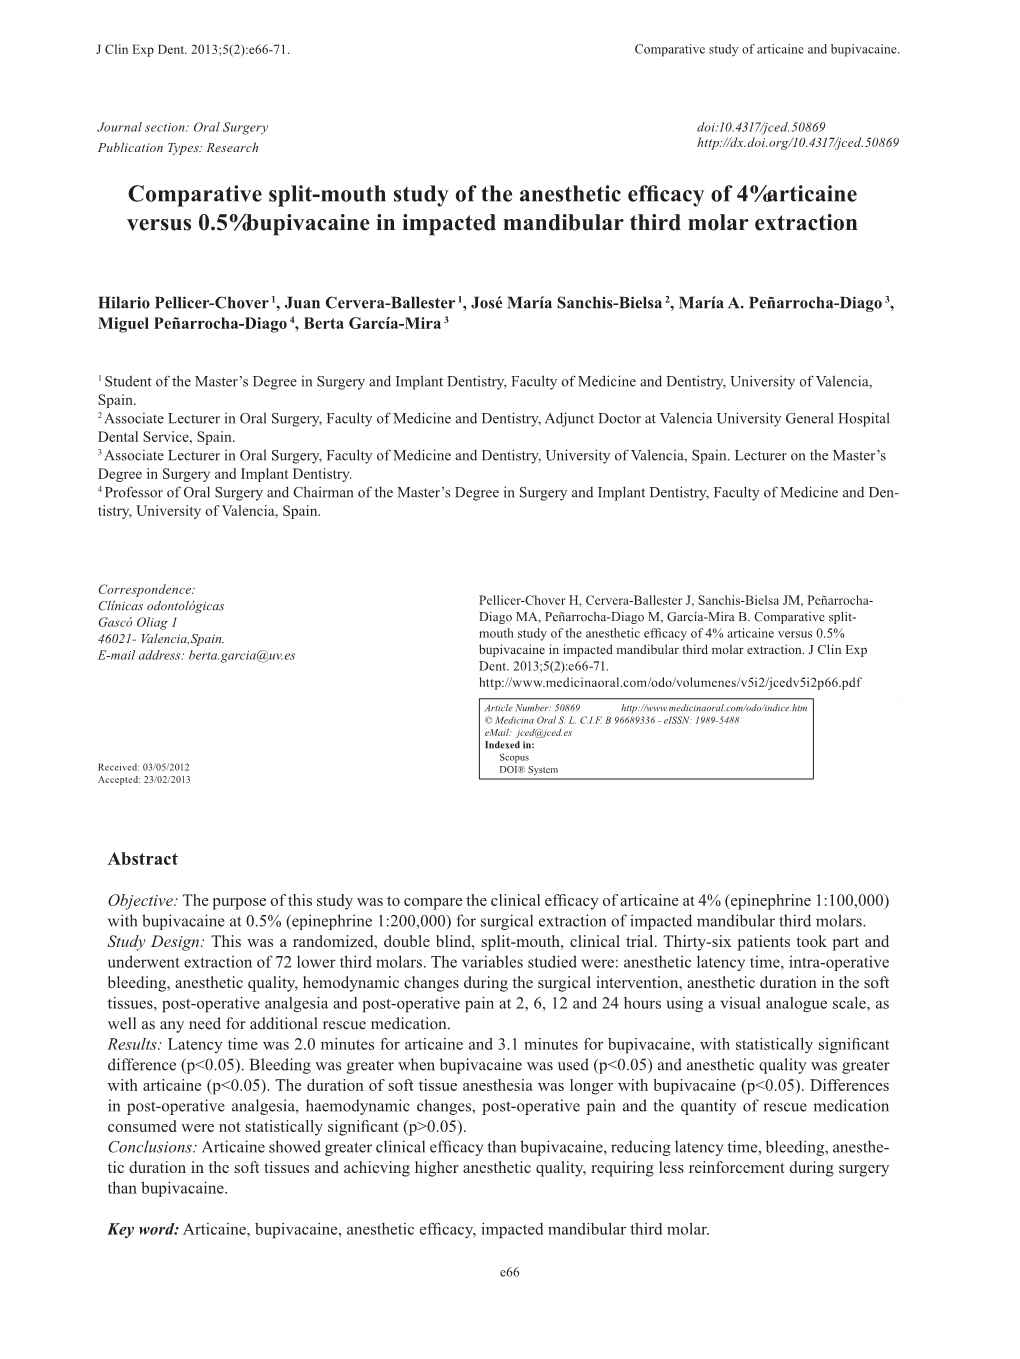 Comparative Split-Mouth Study of the Anesthetic Efficacy of 4% Articaine Versus 0.5% Bupivacaine in Impacted Mandibular Third Molar Extraction